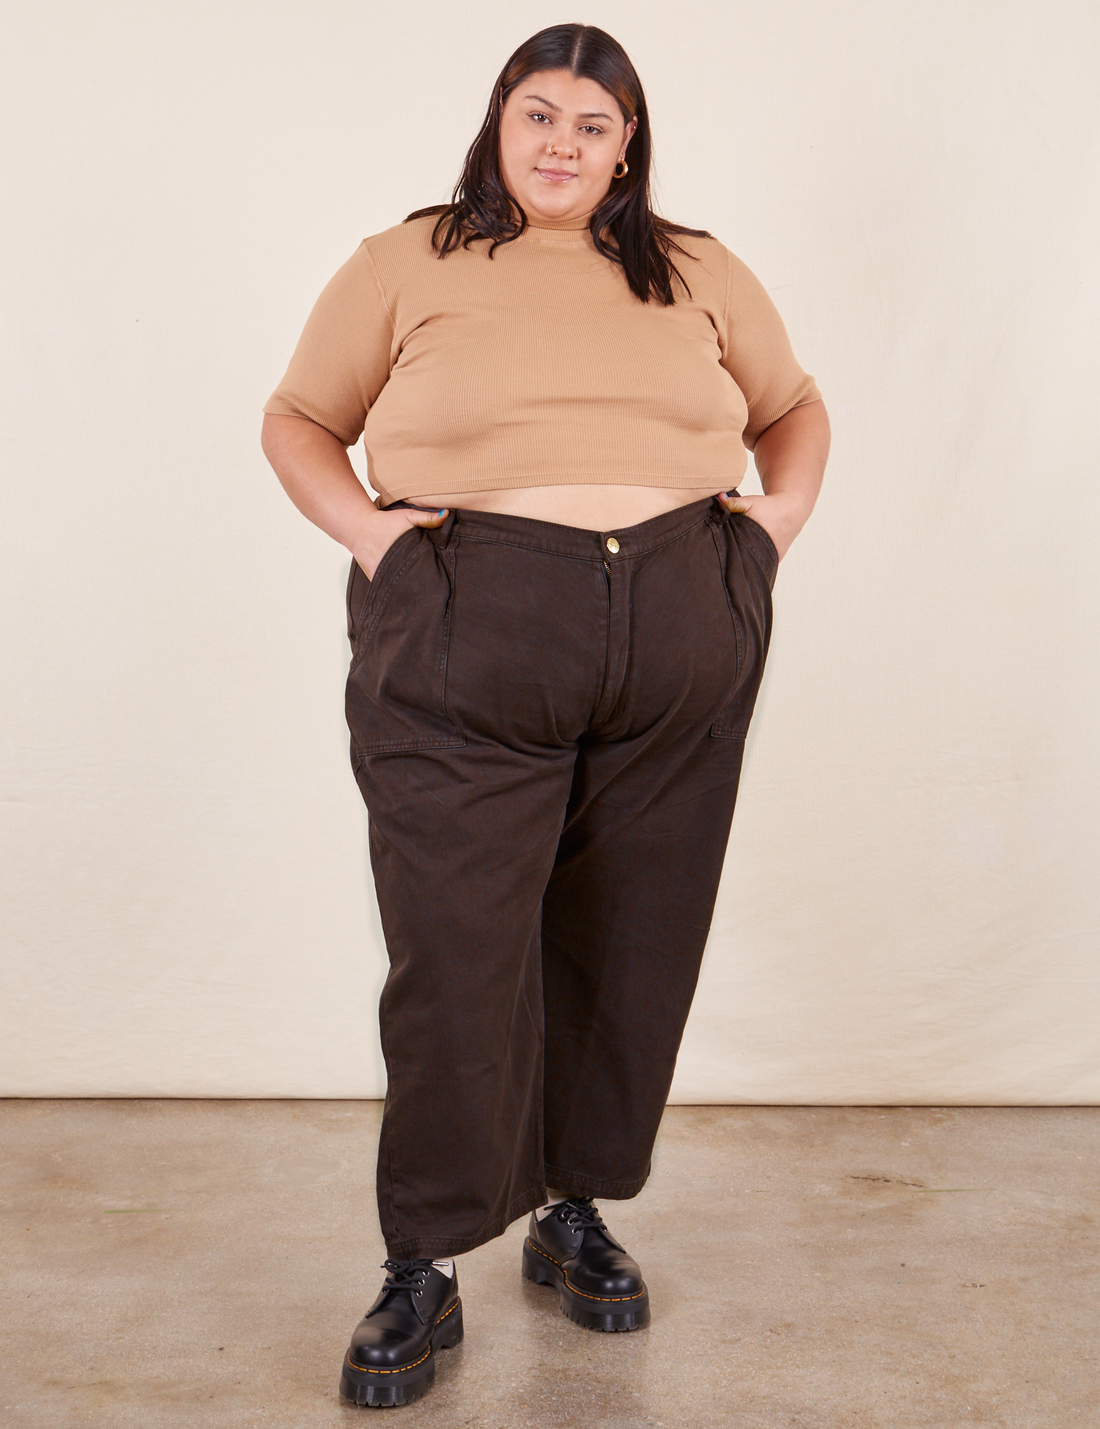 Sarita is 5'7" and wearing Petite 4XL Work Pants in Espresso Brown paired with 1/2 Sleeve Turtleneck in Tan